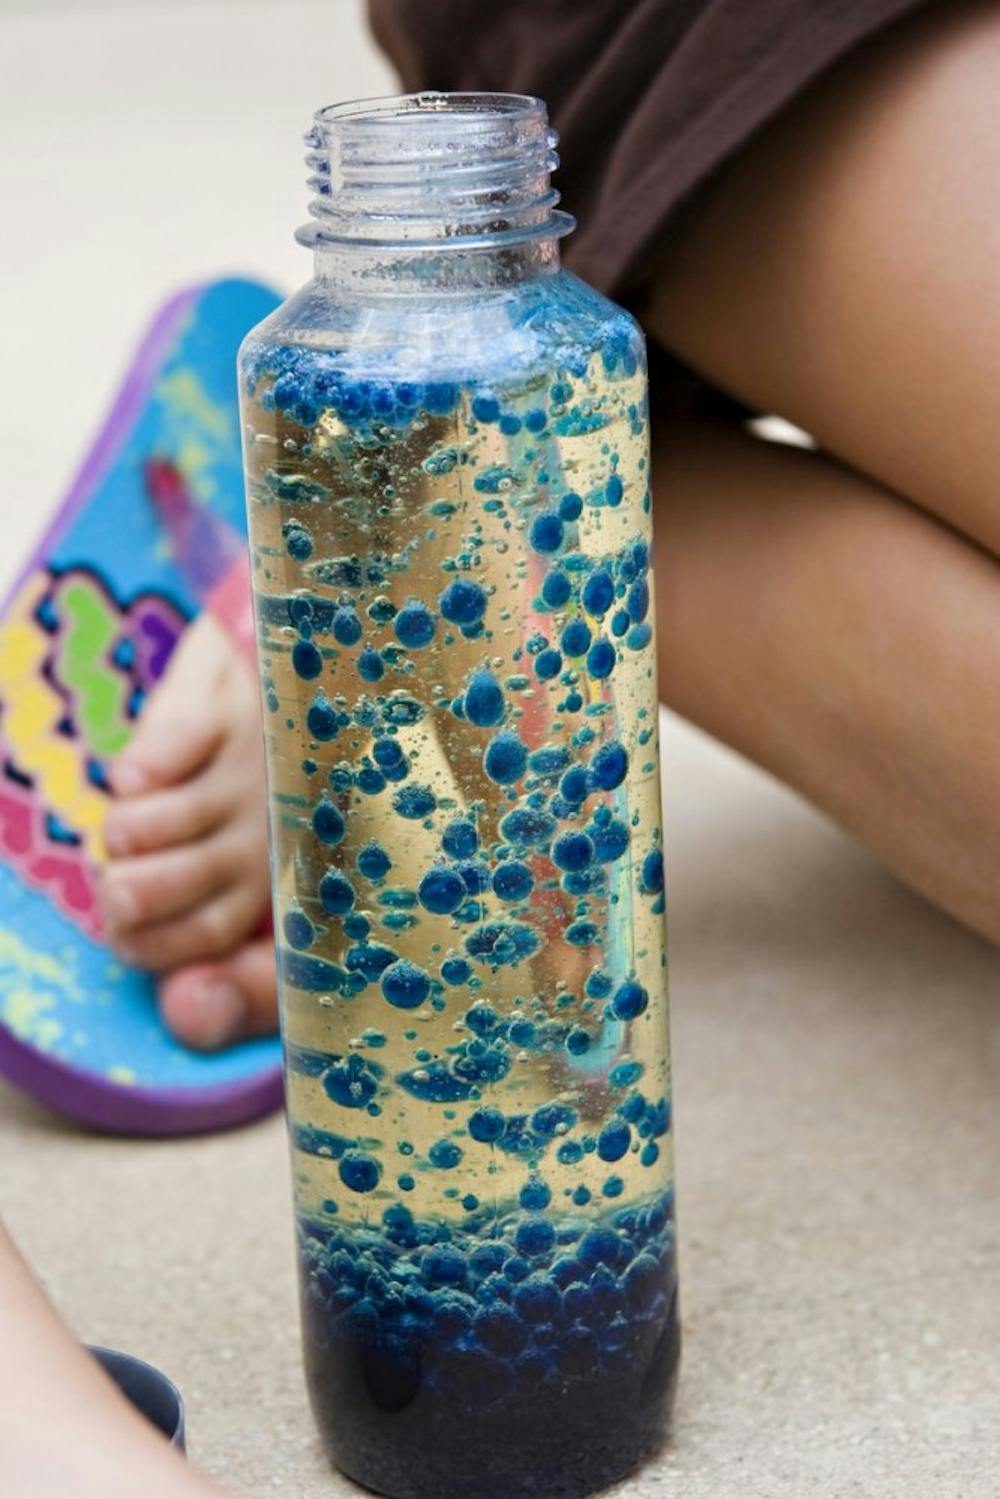 A DIY bubbling lava lamp. Photo from S.L. Smith Photography.